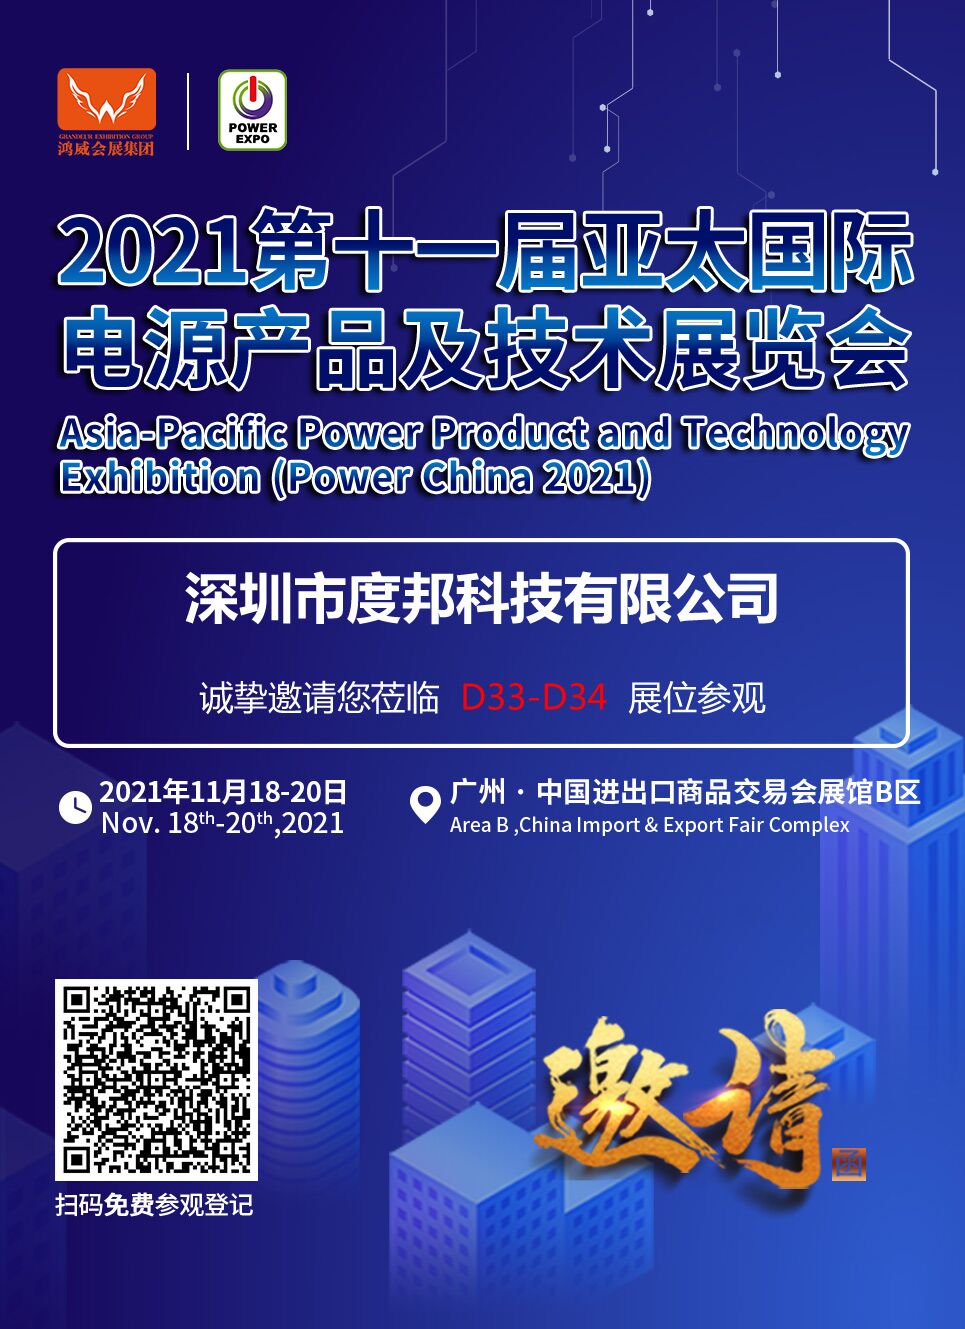 Invitation letter for the 11th Asia-Pacific International Power Products and Technology Exhibition